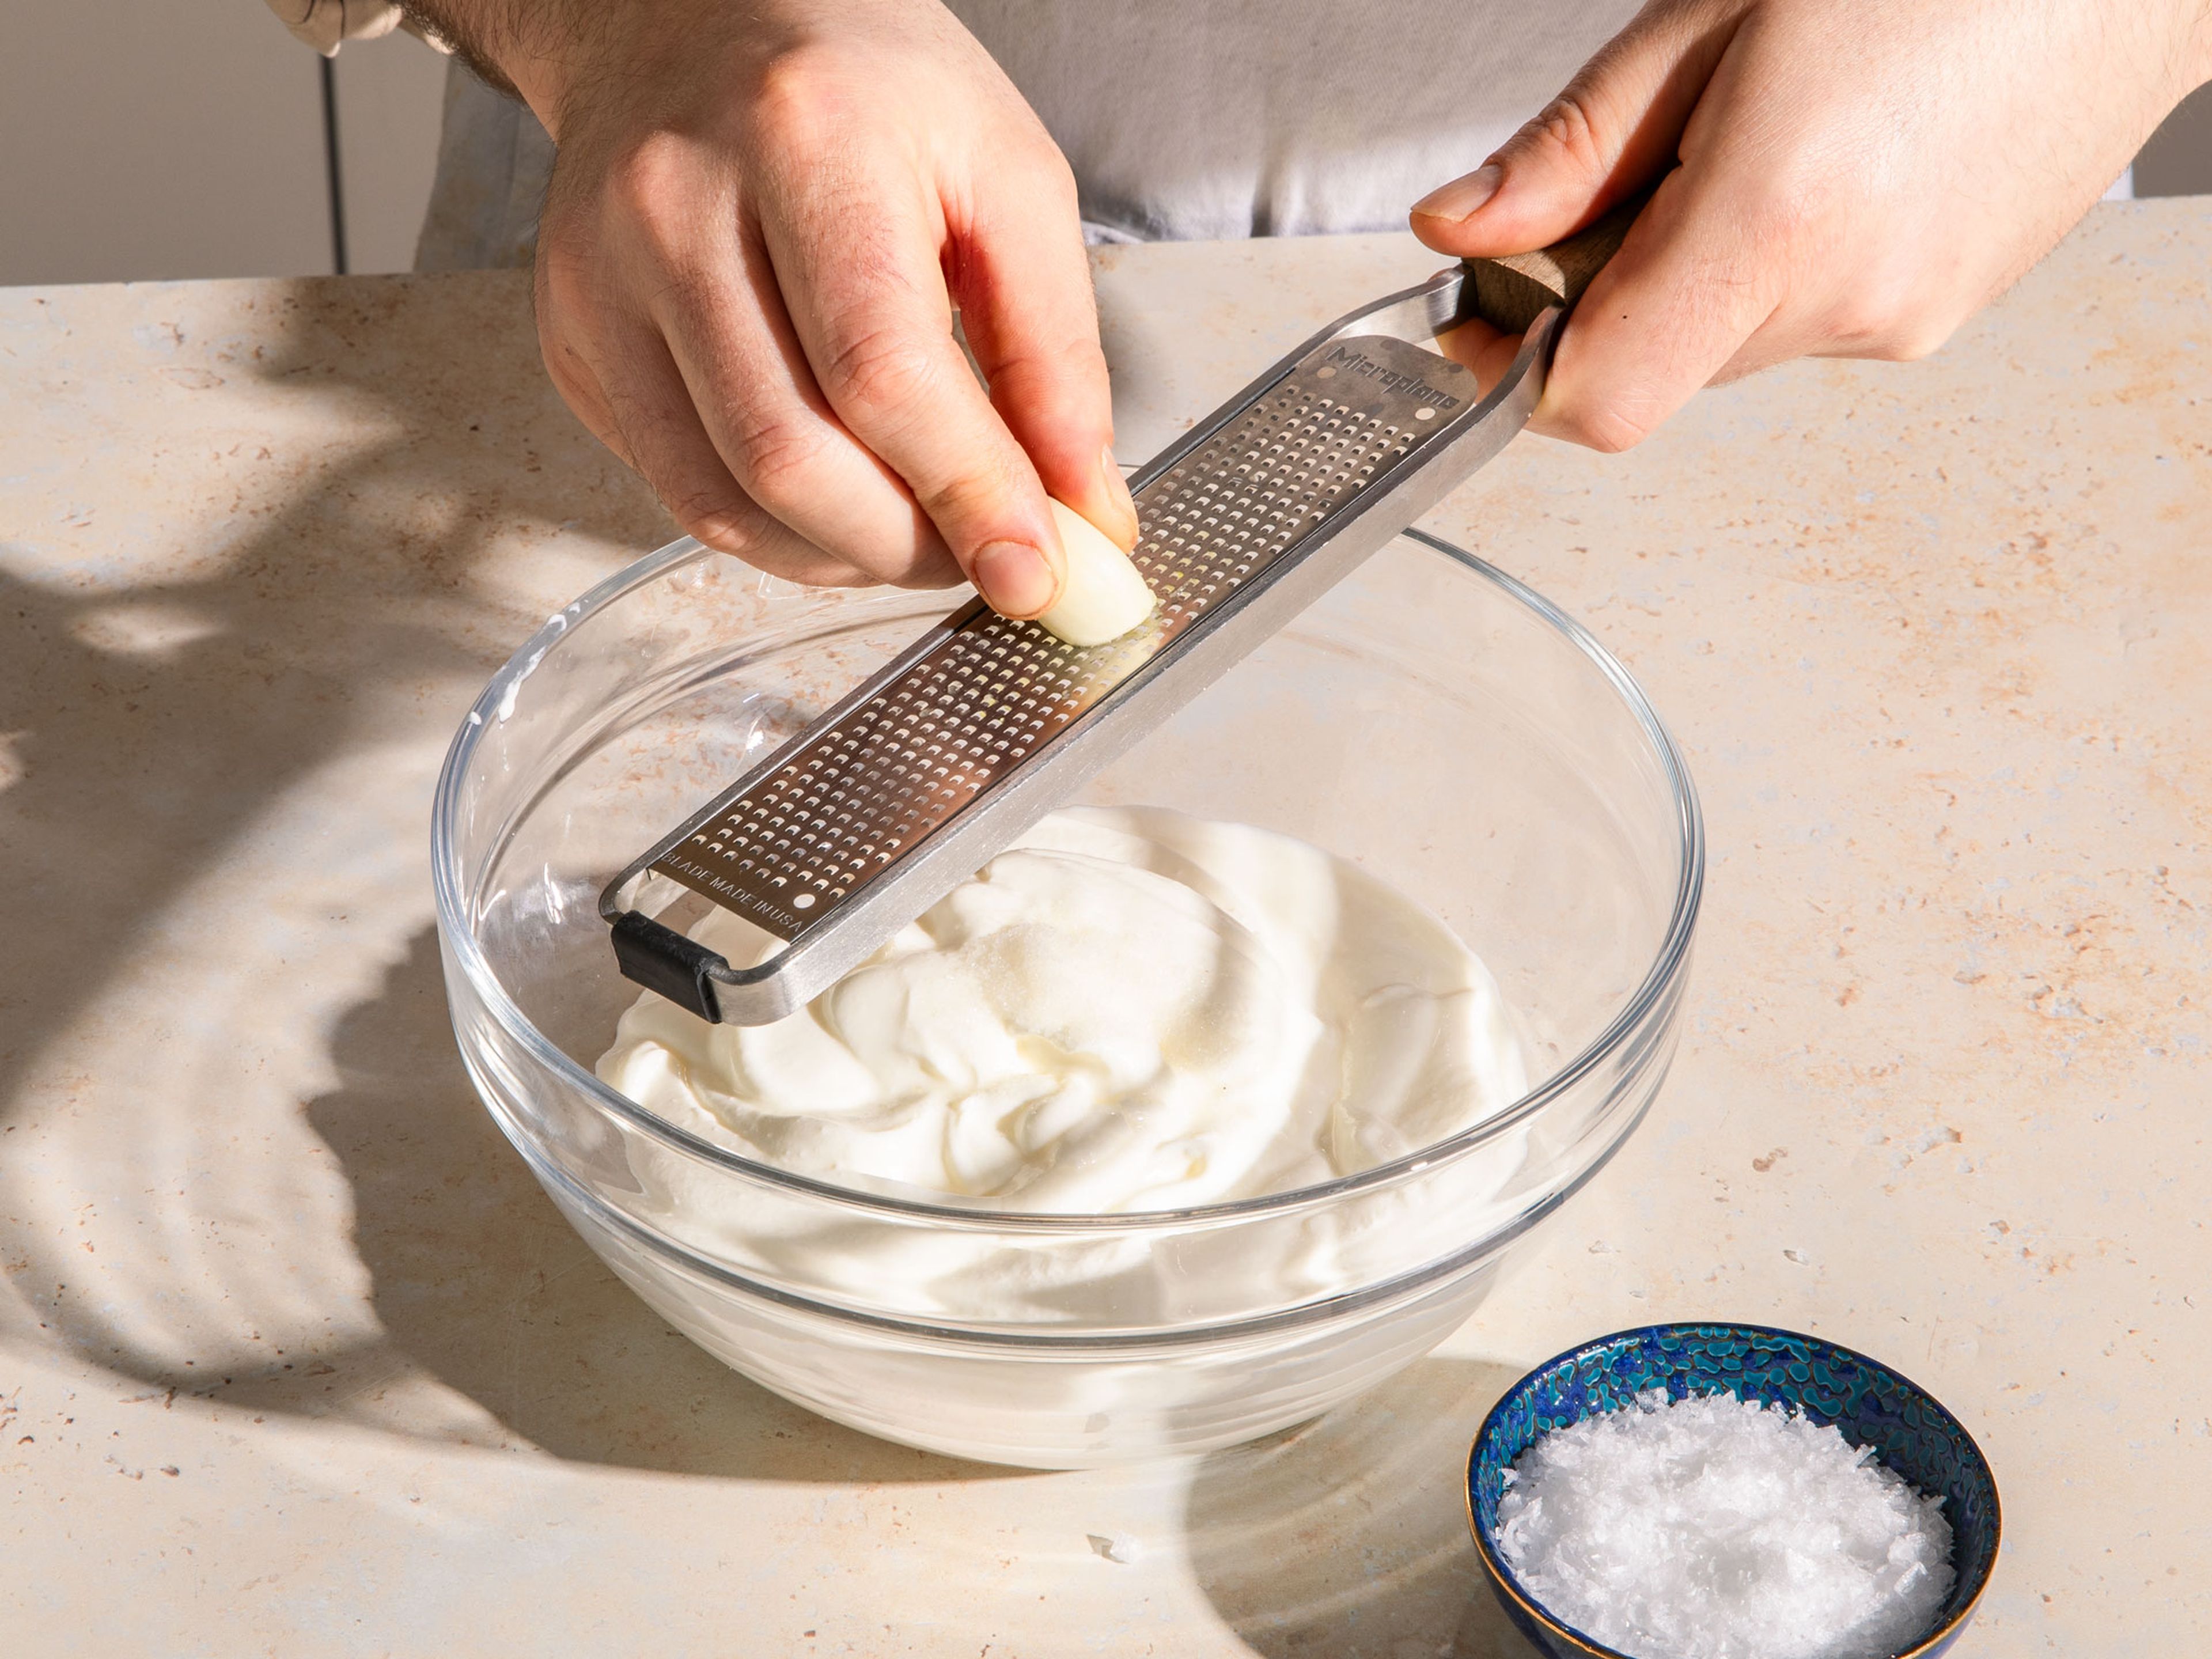 Place the yogurt in a bowl, add a little salt and grate in the garlic and stir. Using a spatula, transfer the mixed yogurt to a clean kitchen towel or cheesecloth, twist it up and hang it over a bowl to drain. This step can also be done the night before and can be kept in the fridge.